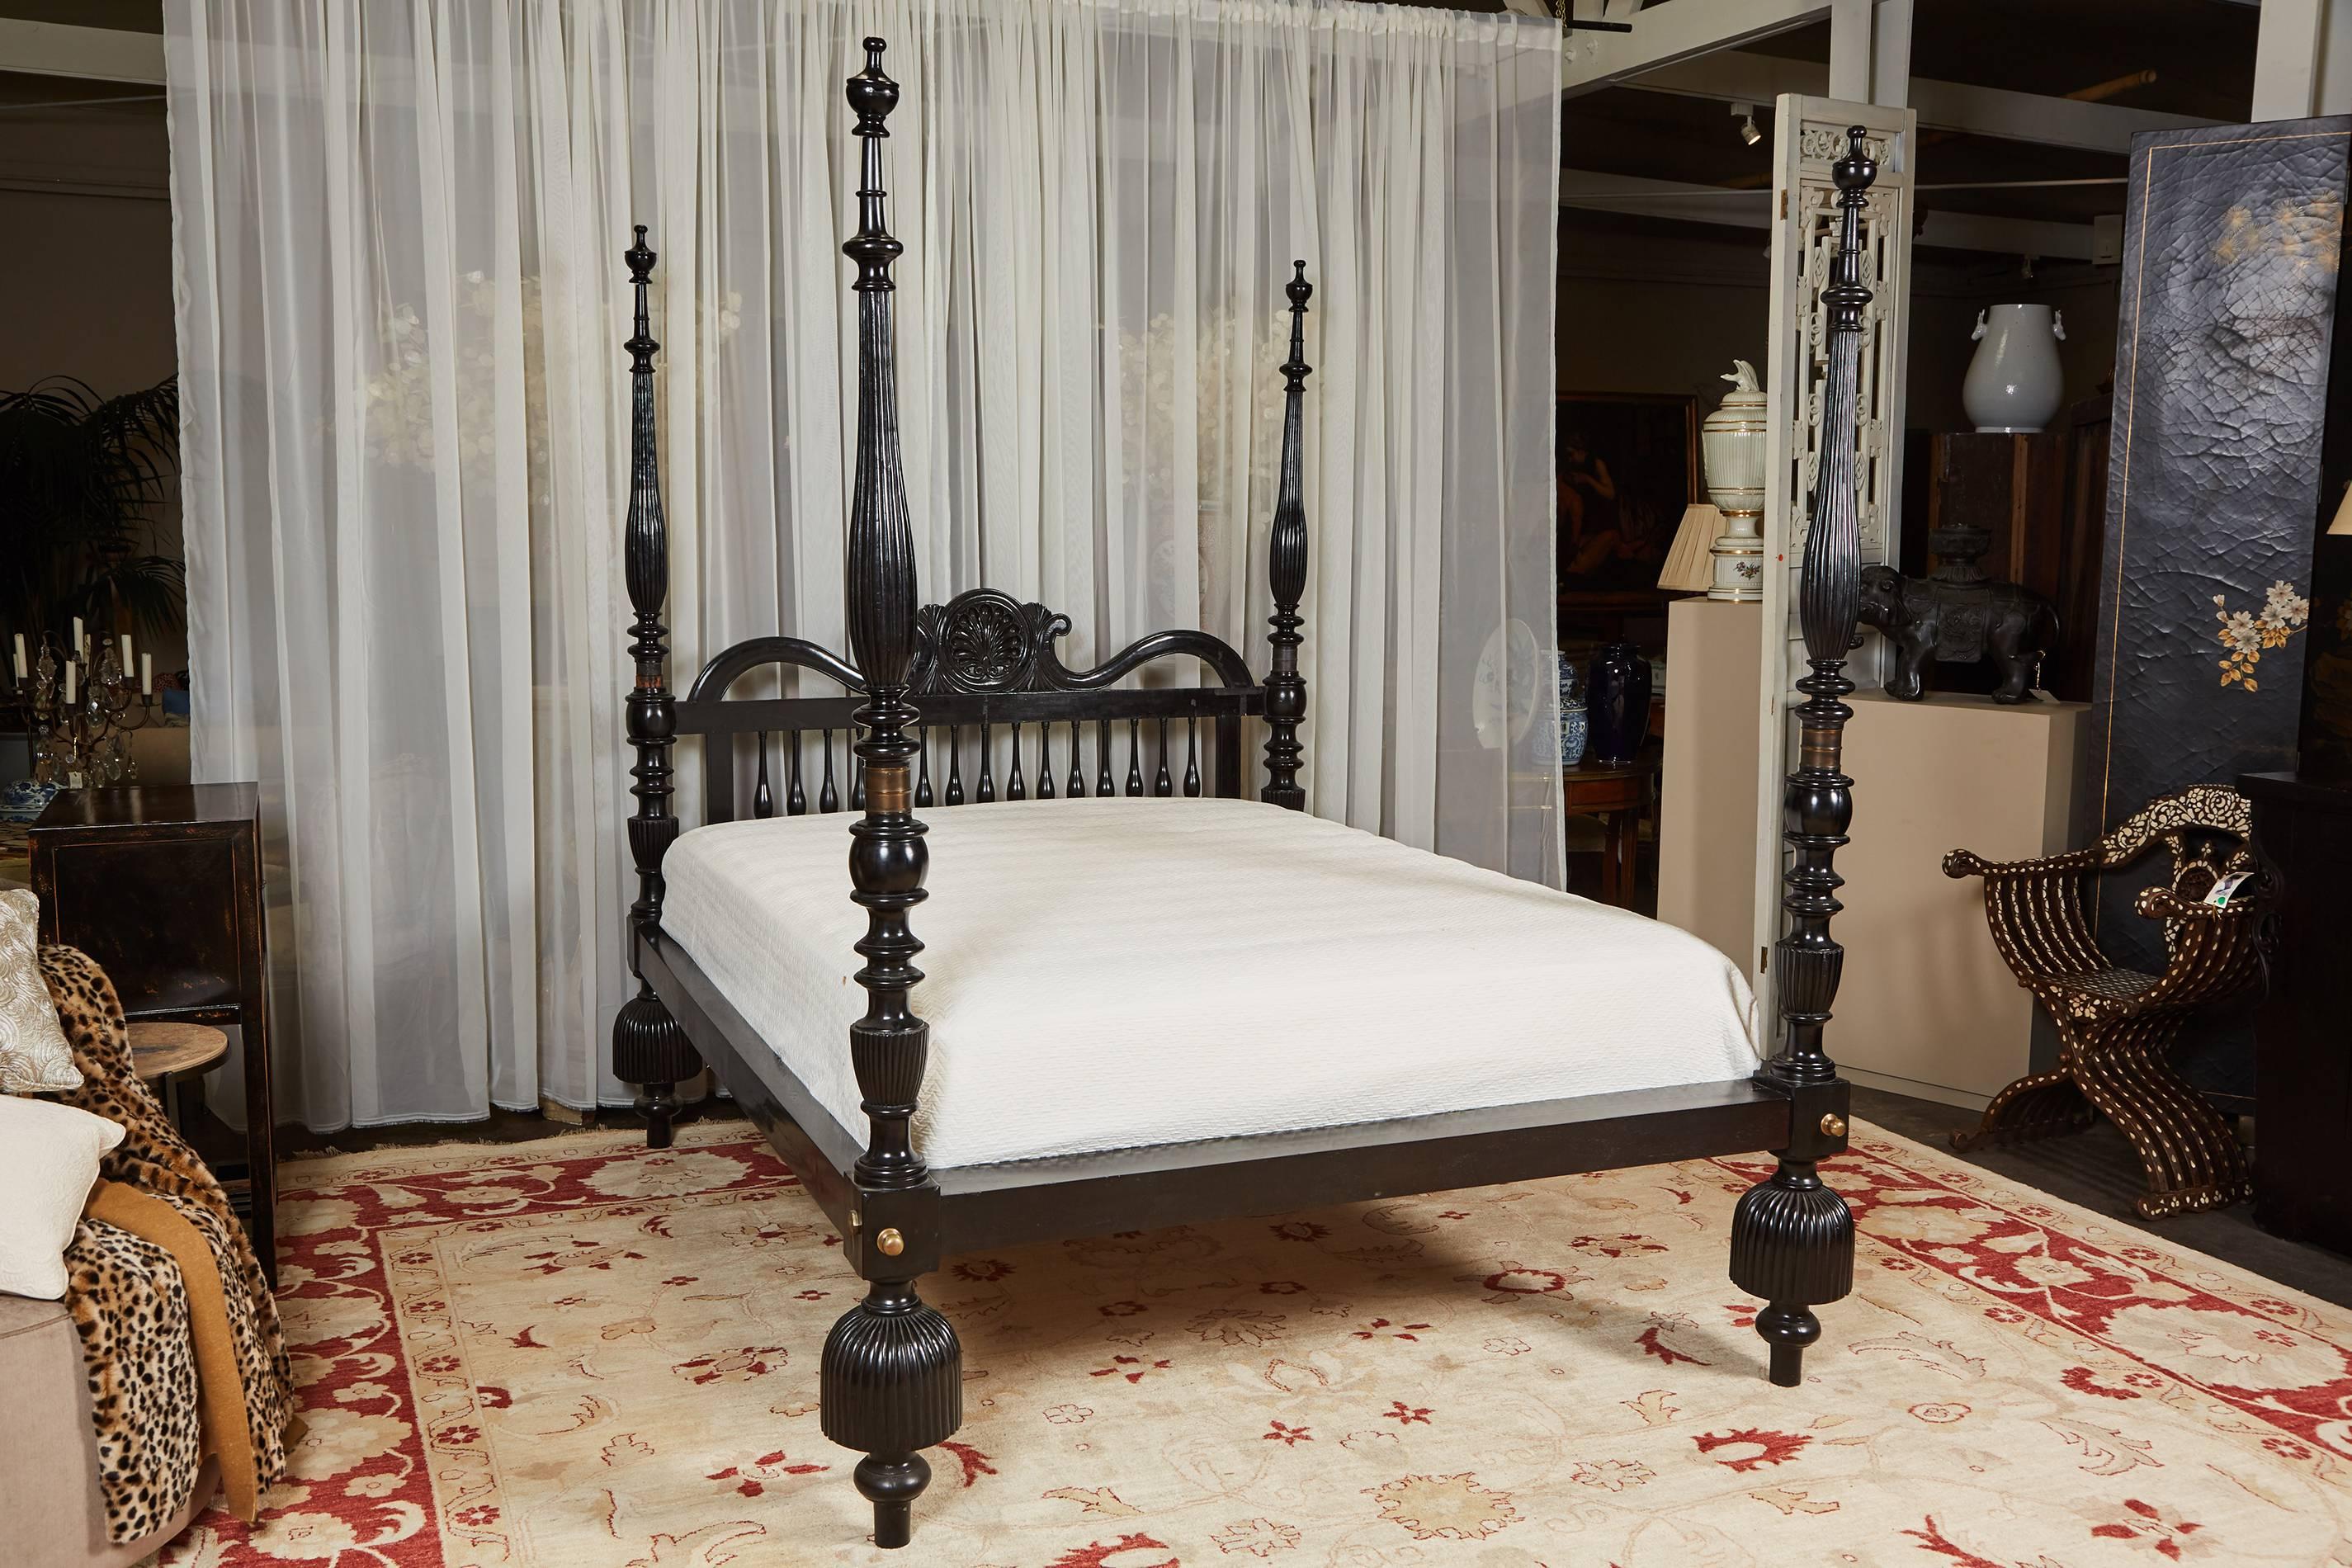 A queen sized 4-poster bed, in Jak wood with an ebonized finish. The bed features hand carved details overall, oversize tassel-style feet, a headboard with shell center decoration. Assembled with cast brass fittings.